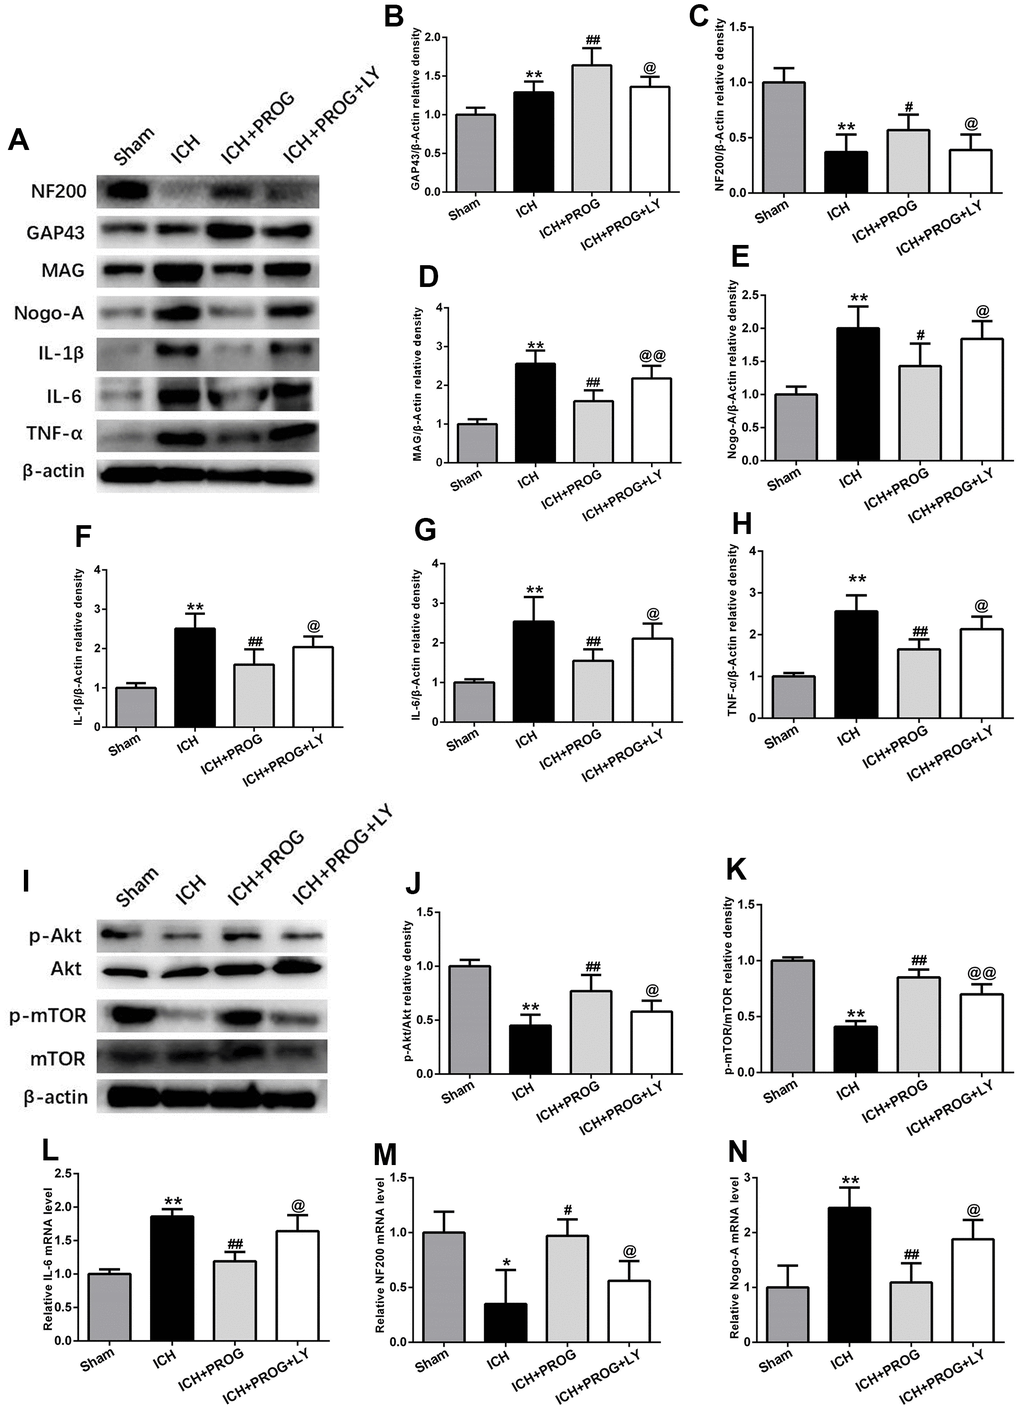 The mechanism of the effects of progesterone on anti-inflammation and promoting axonal regeneration. (A) Representative Western bands showing the protein expression of NF200, GAP43, Nogo-A, MAG IL-1β, IL-6 and TNF-α in perihematomal region.(B–H) Quantitative analysis of Western blots shows that the expression of NF200, GAP43, Nogo-A, MAG IL-1β, IL-6 and TNF-α changes in each group. (I) Representative Western bands showing the protein expression of p-Akt, total-Akt, p-mTOR and total-mTOR in perihematomal region. n = 6 animals per group. (J, K) Quantitative analysis of Western blots shows that the expression of p-Akt/total-Akt, p-mTOR/total-mTOR changes in each group. (L–N) mRNA expression levels of inflammatory and axon-related markers. n = 3 animals per group. Data are expressed as the mean ± SEM; *P #P ##P 